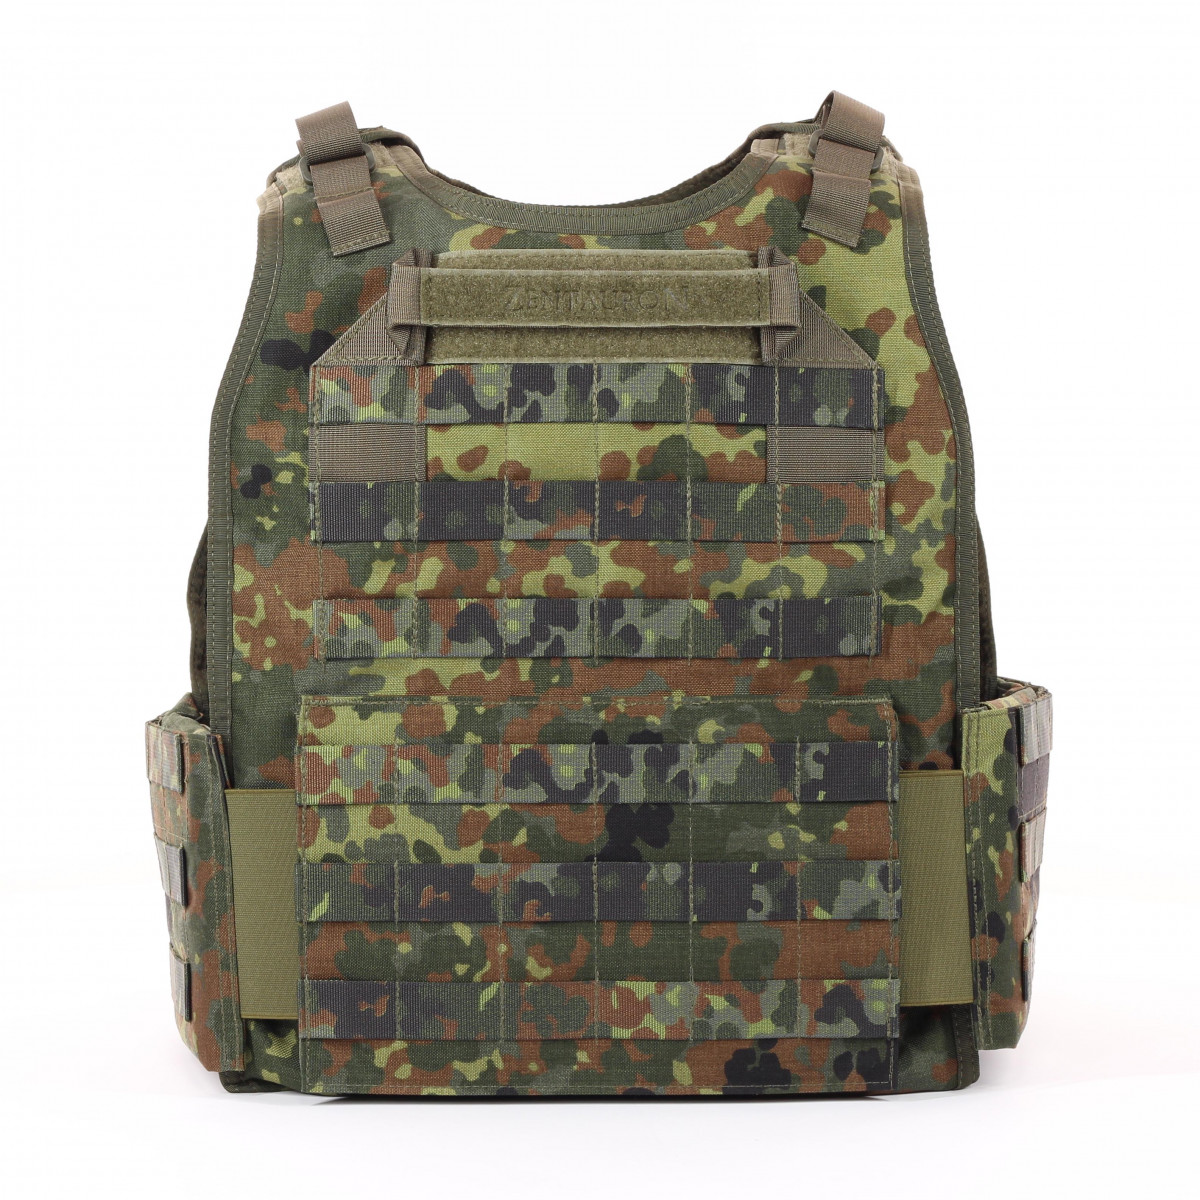 ARES plate carrier vest in camouflage